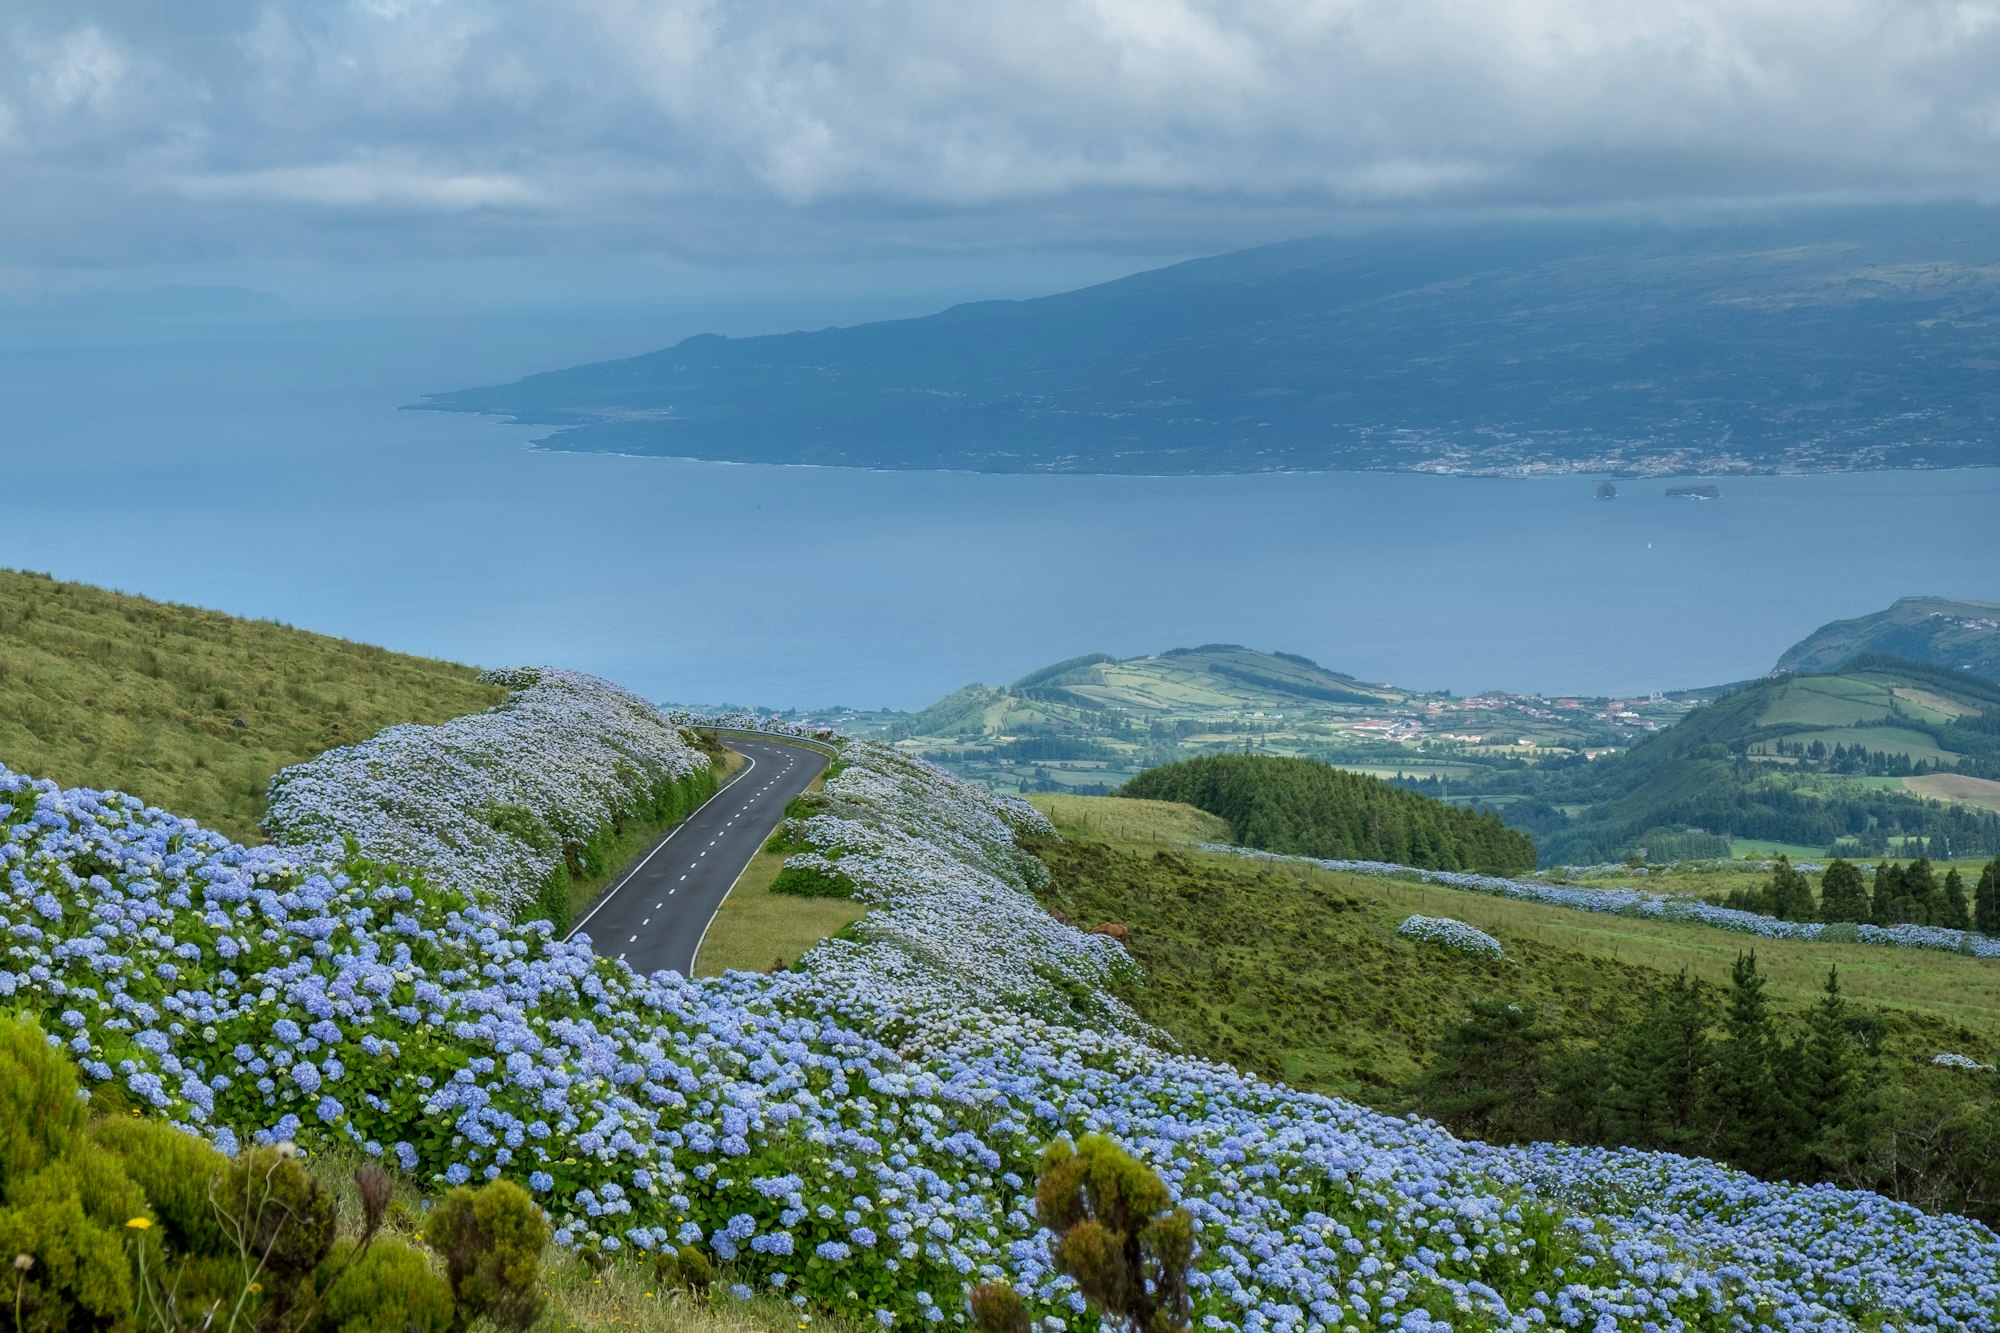 The most beautiful road with flowers with an ocean view on Faial Island, Azores.